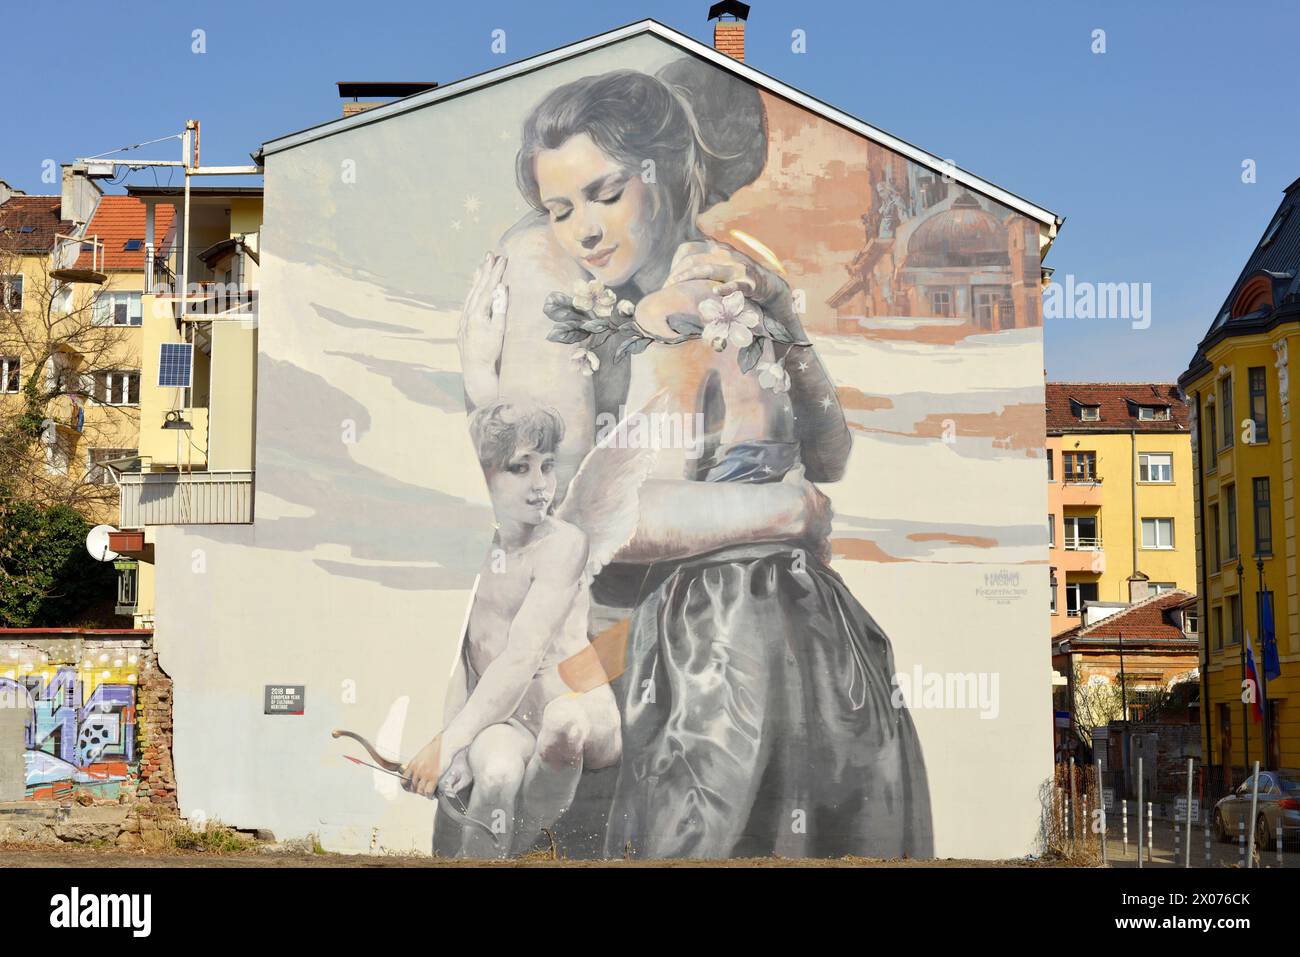 Mural The Hug depicting a couple hugging and little boy as Eros the God of love in Sofia Bulgaria, Eastern Europe, Balkans, EU Stock Photo